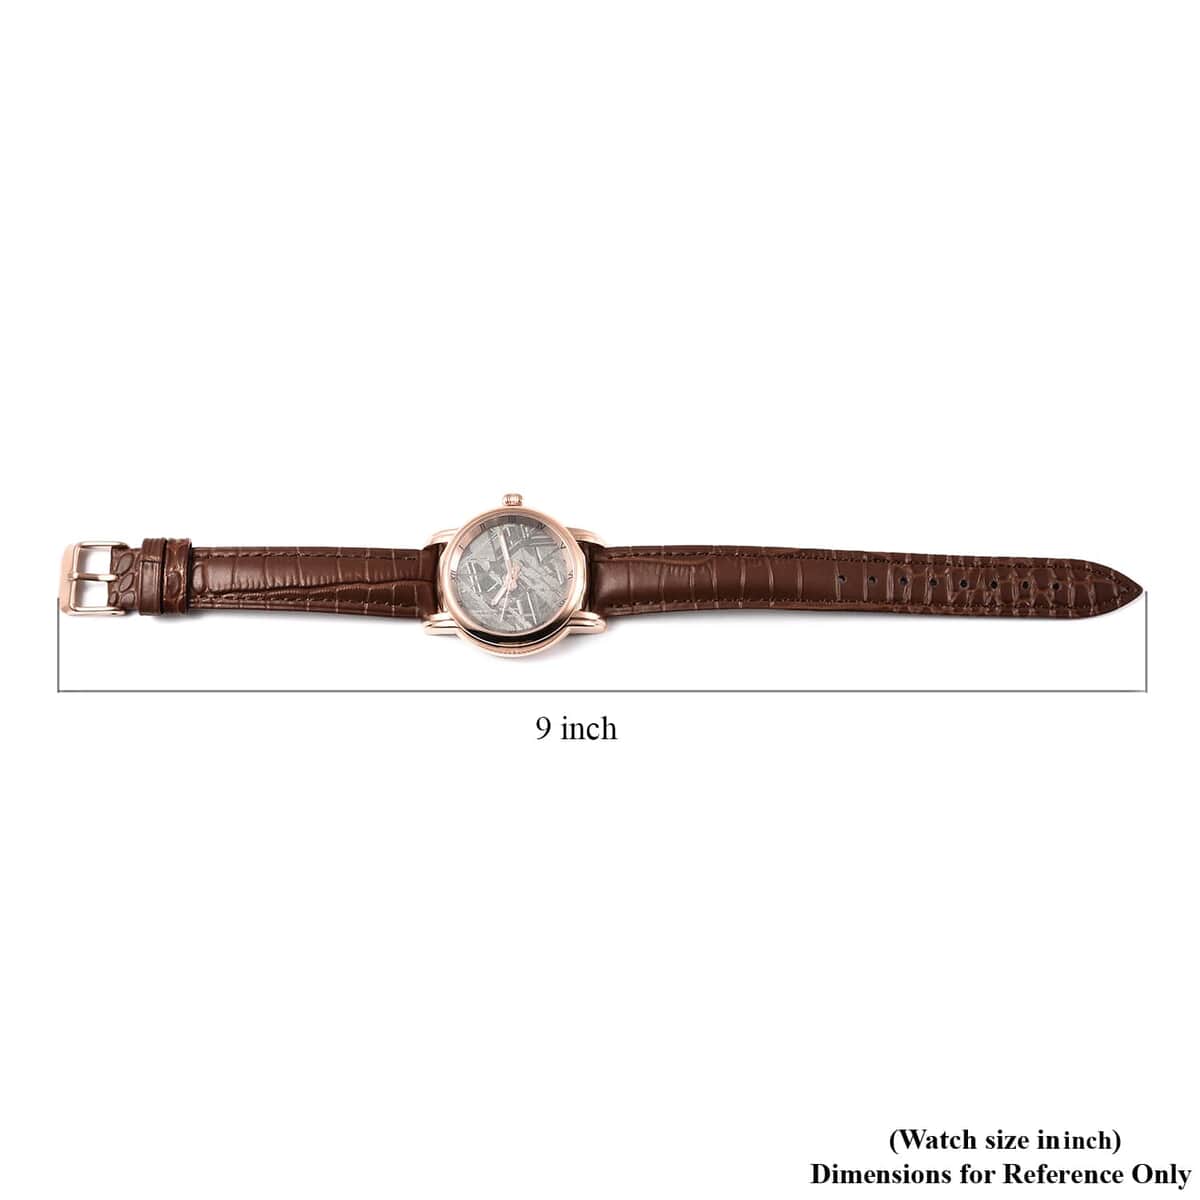 Eon 1962 Swiss Movement Watch with Marvelous Meteorite Dial & Light Brown Leather Strap, Designer Gemstone Watch, Analog Luxury Wristwatch image number 6